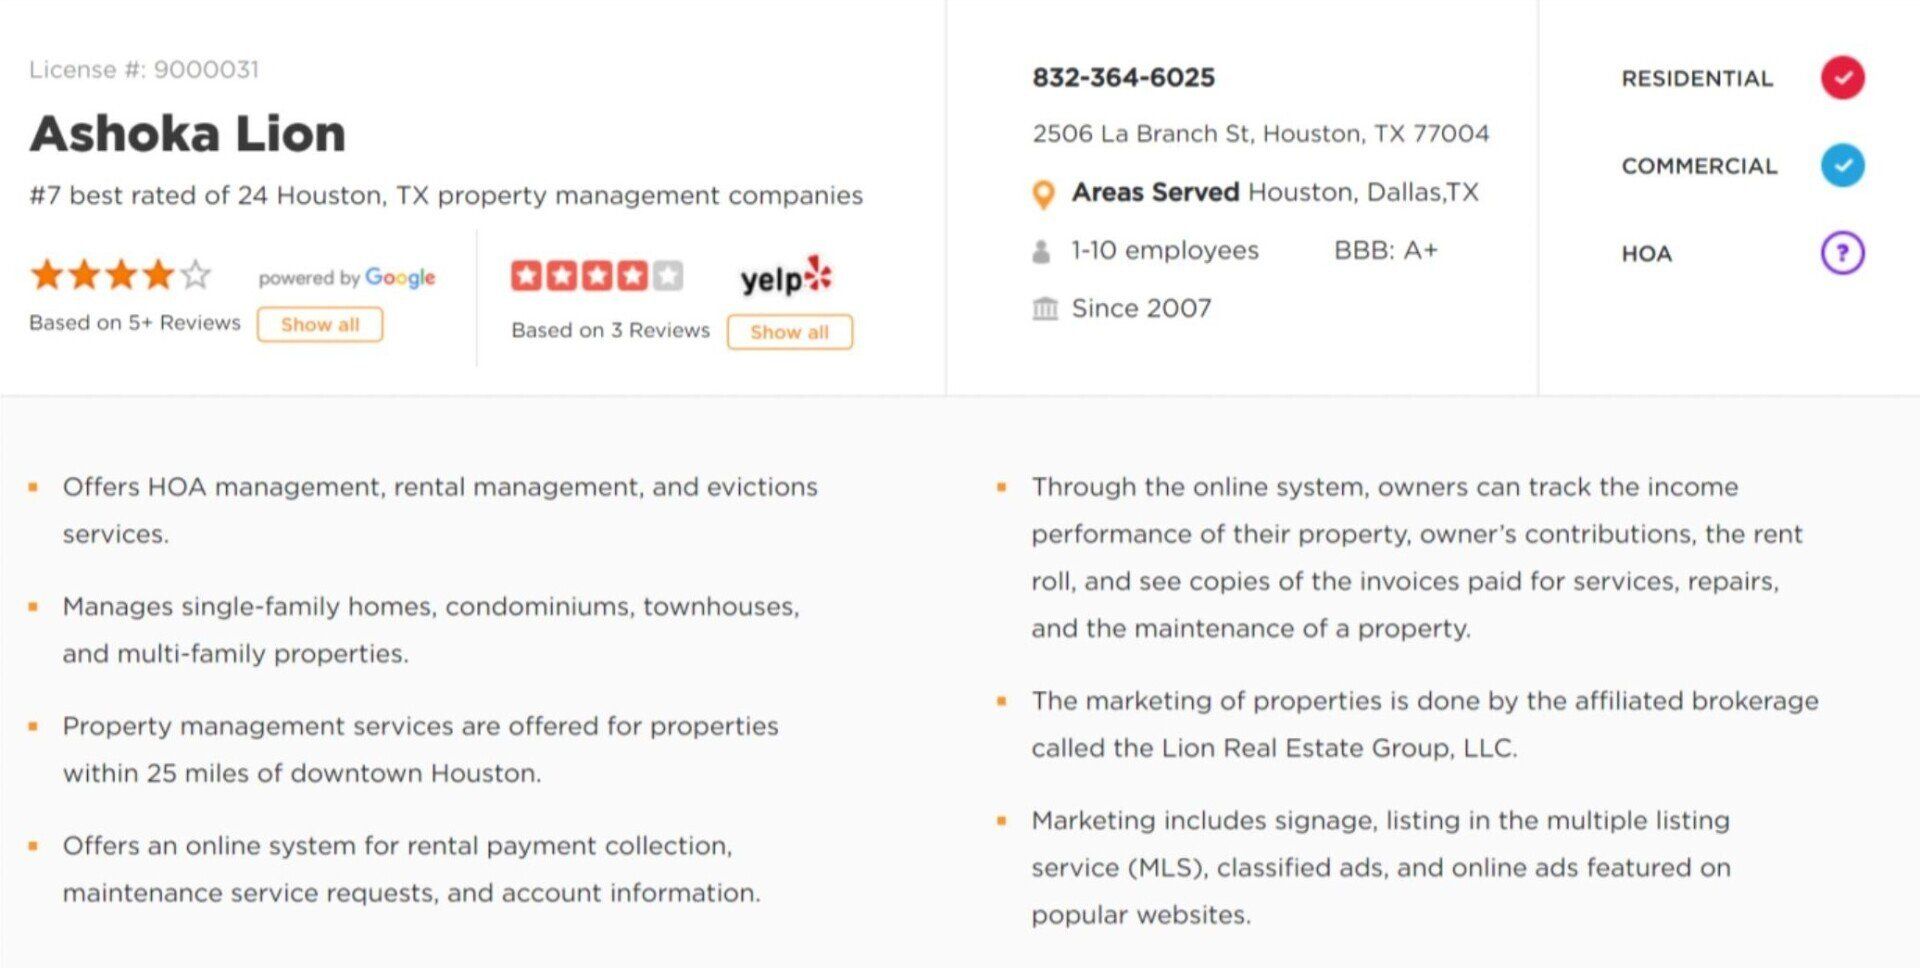 Ashoka Lion Ranked 7 in top 24 Houston Property Management Firms by iPropertyManagement.com